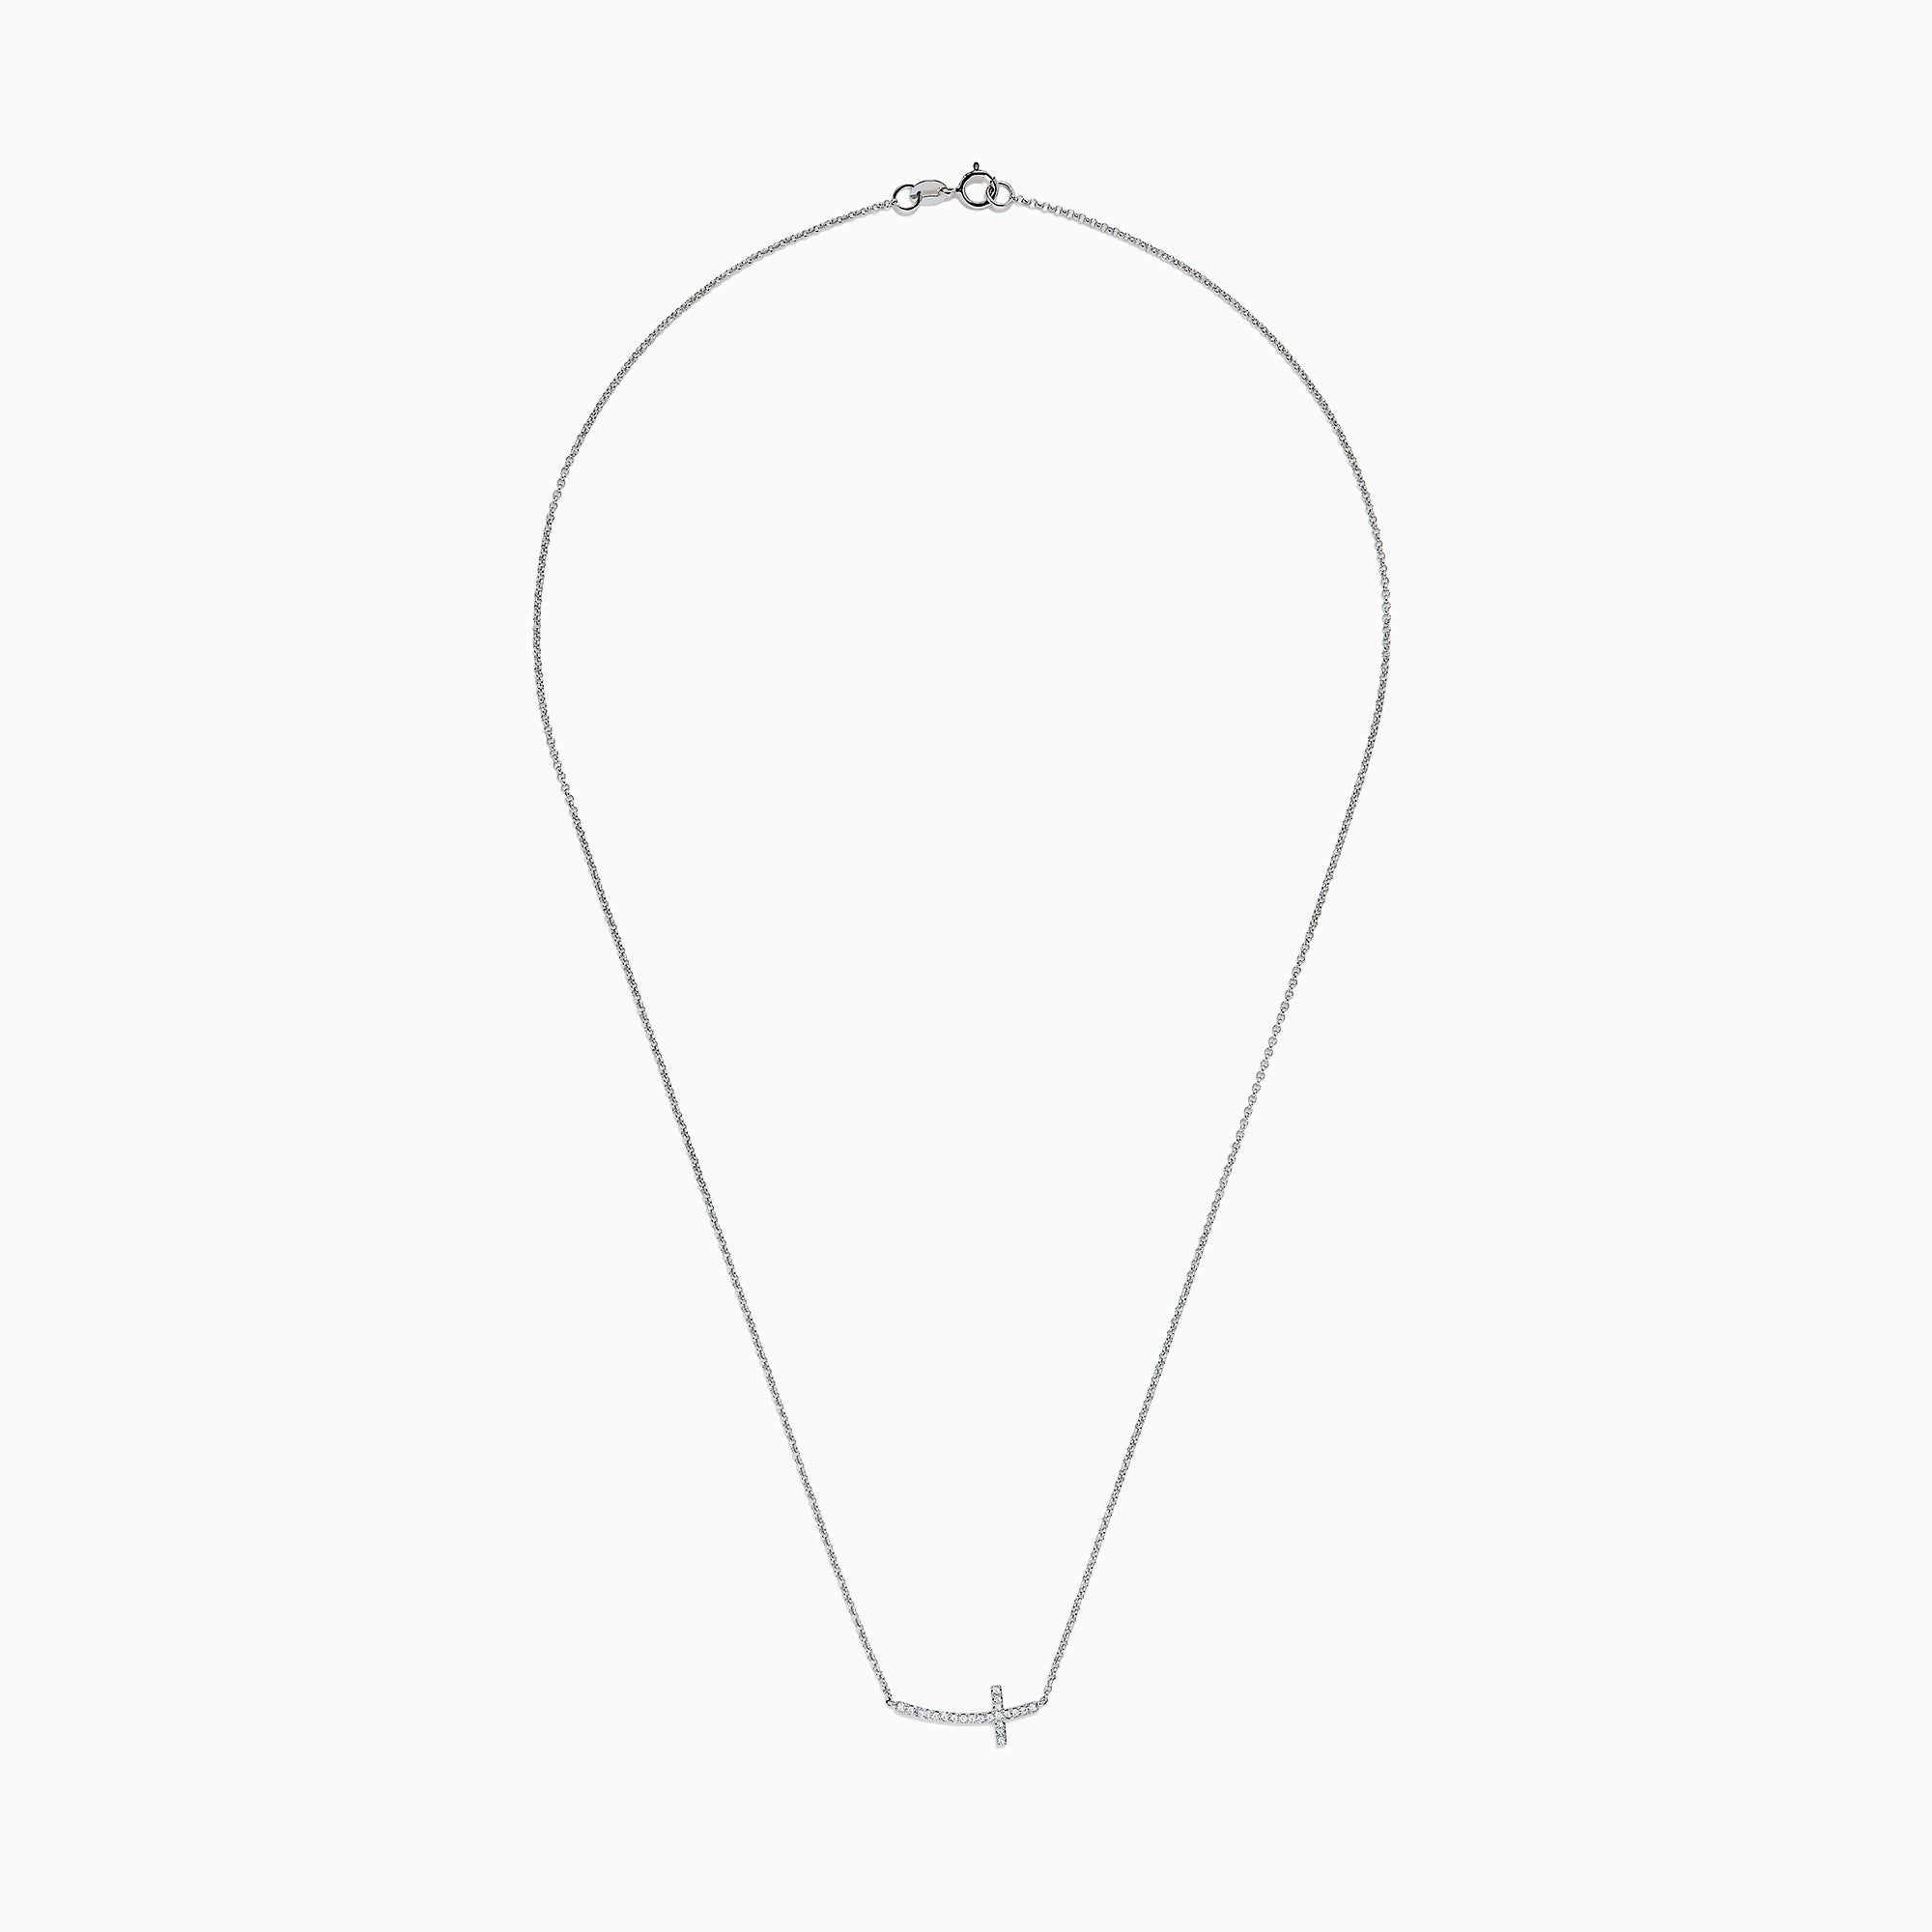 Small Sideways Cross Necklace in Sterling Silver with Diamonds 1/10 Cttw –  North Arrow Shop